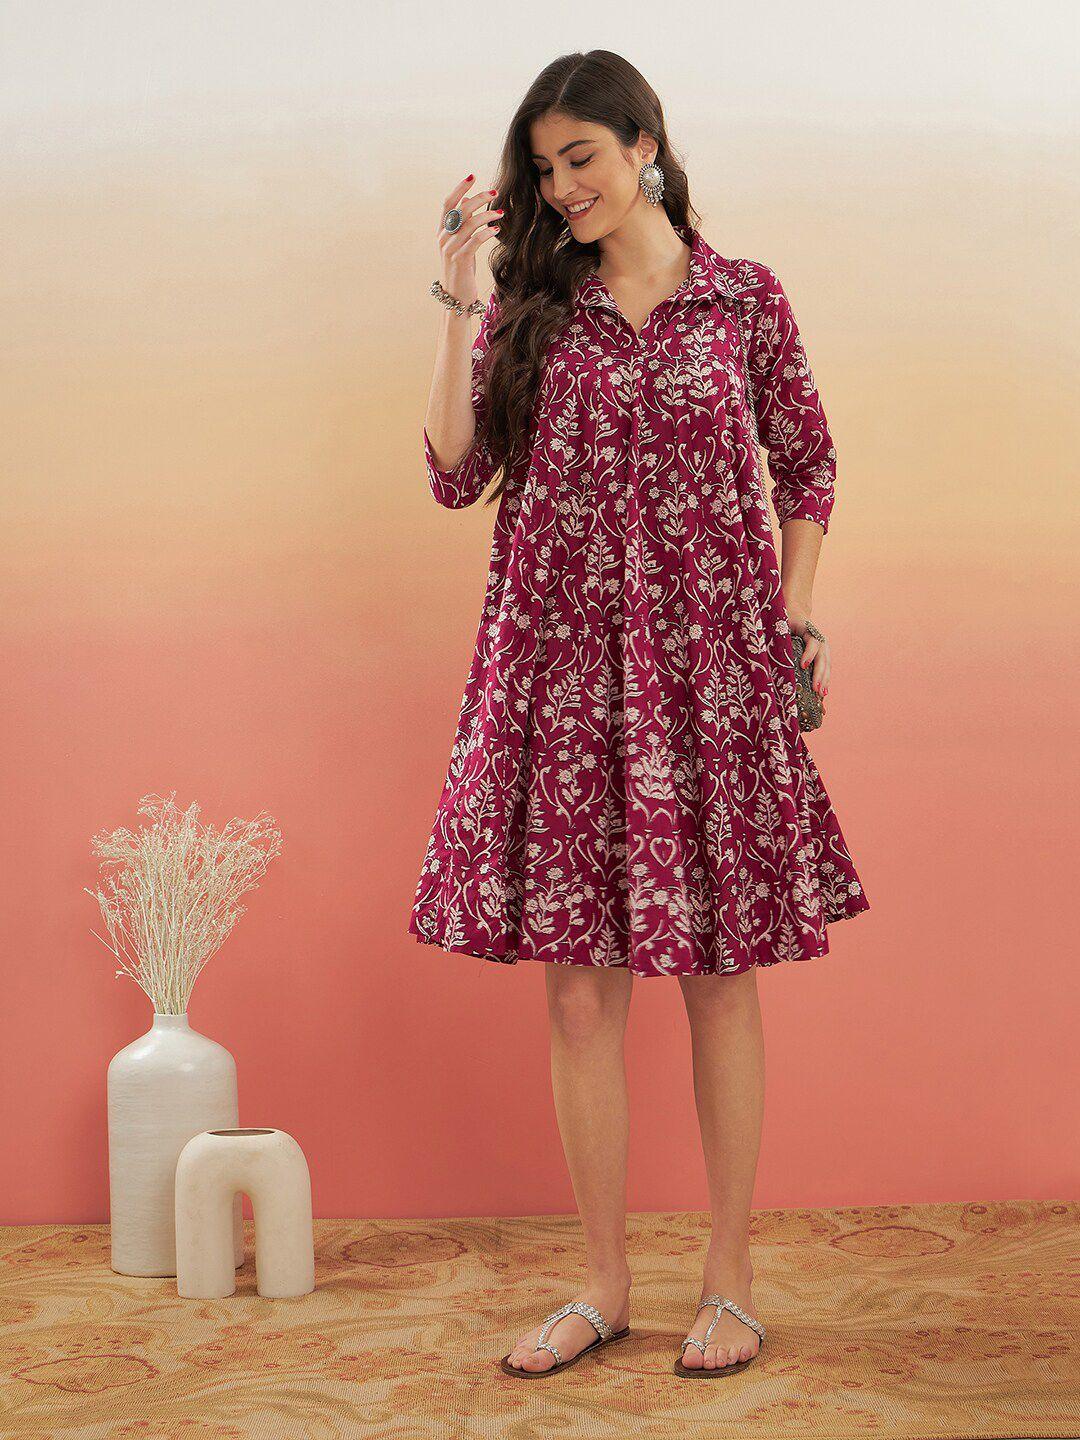 InWeave Floral Printed Shirt Collar Pleated A-Line Dress